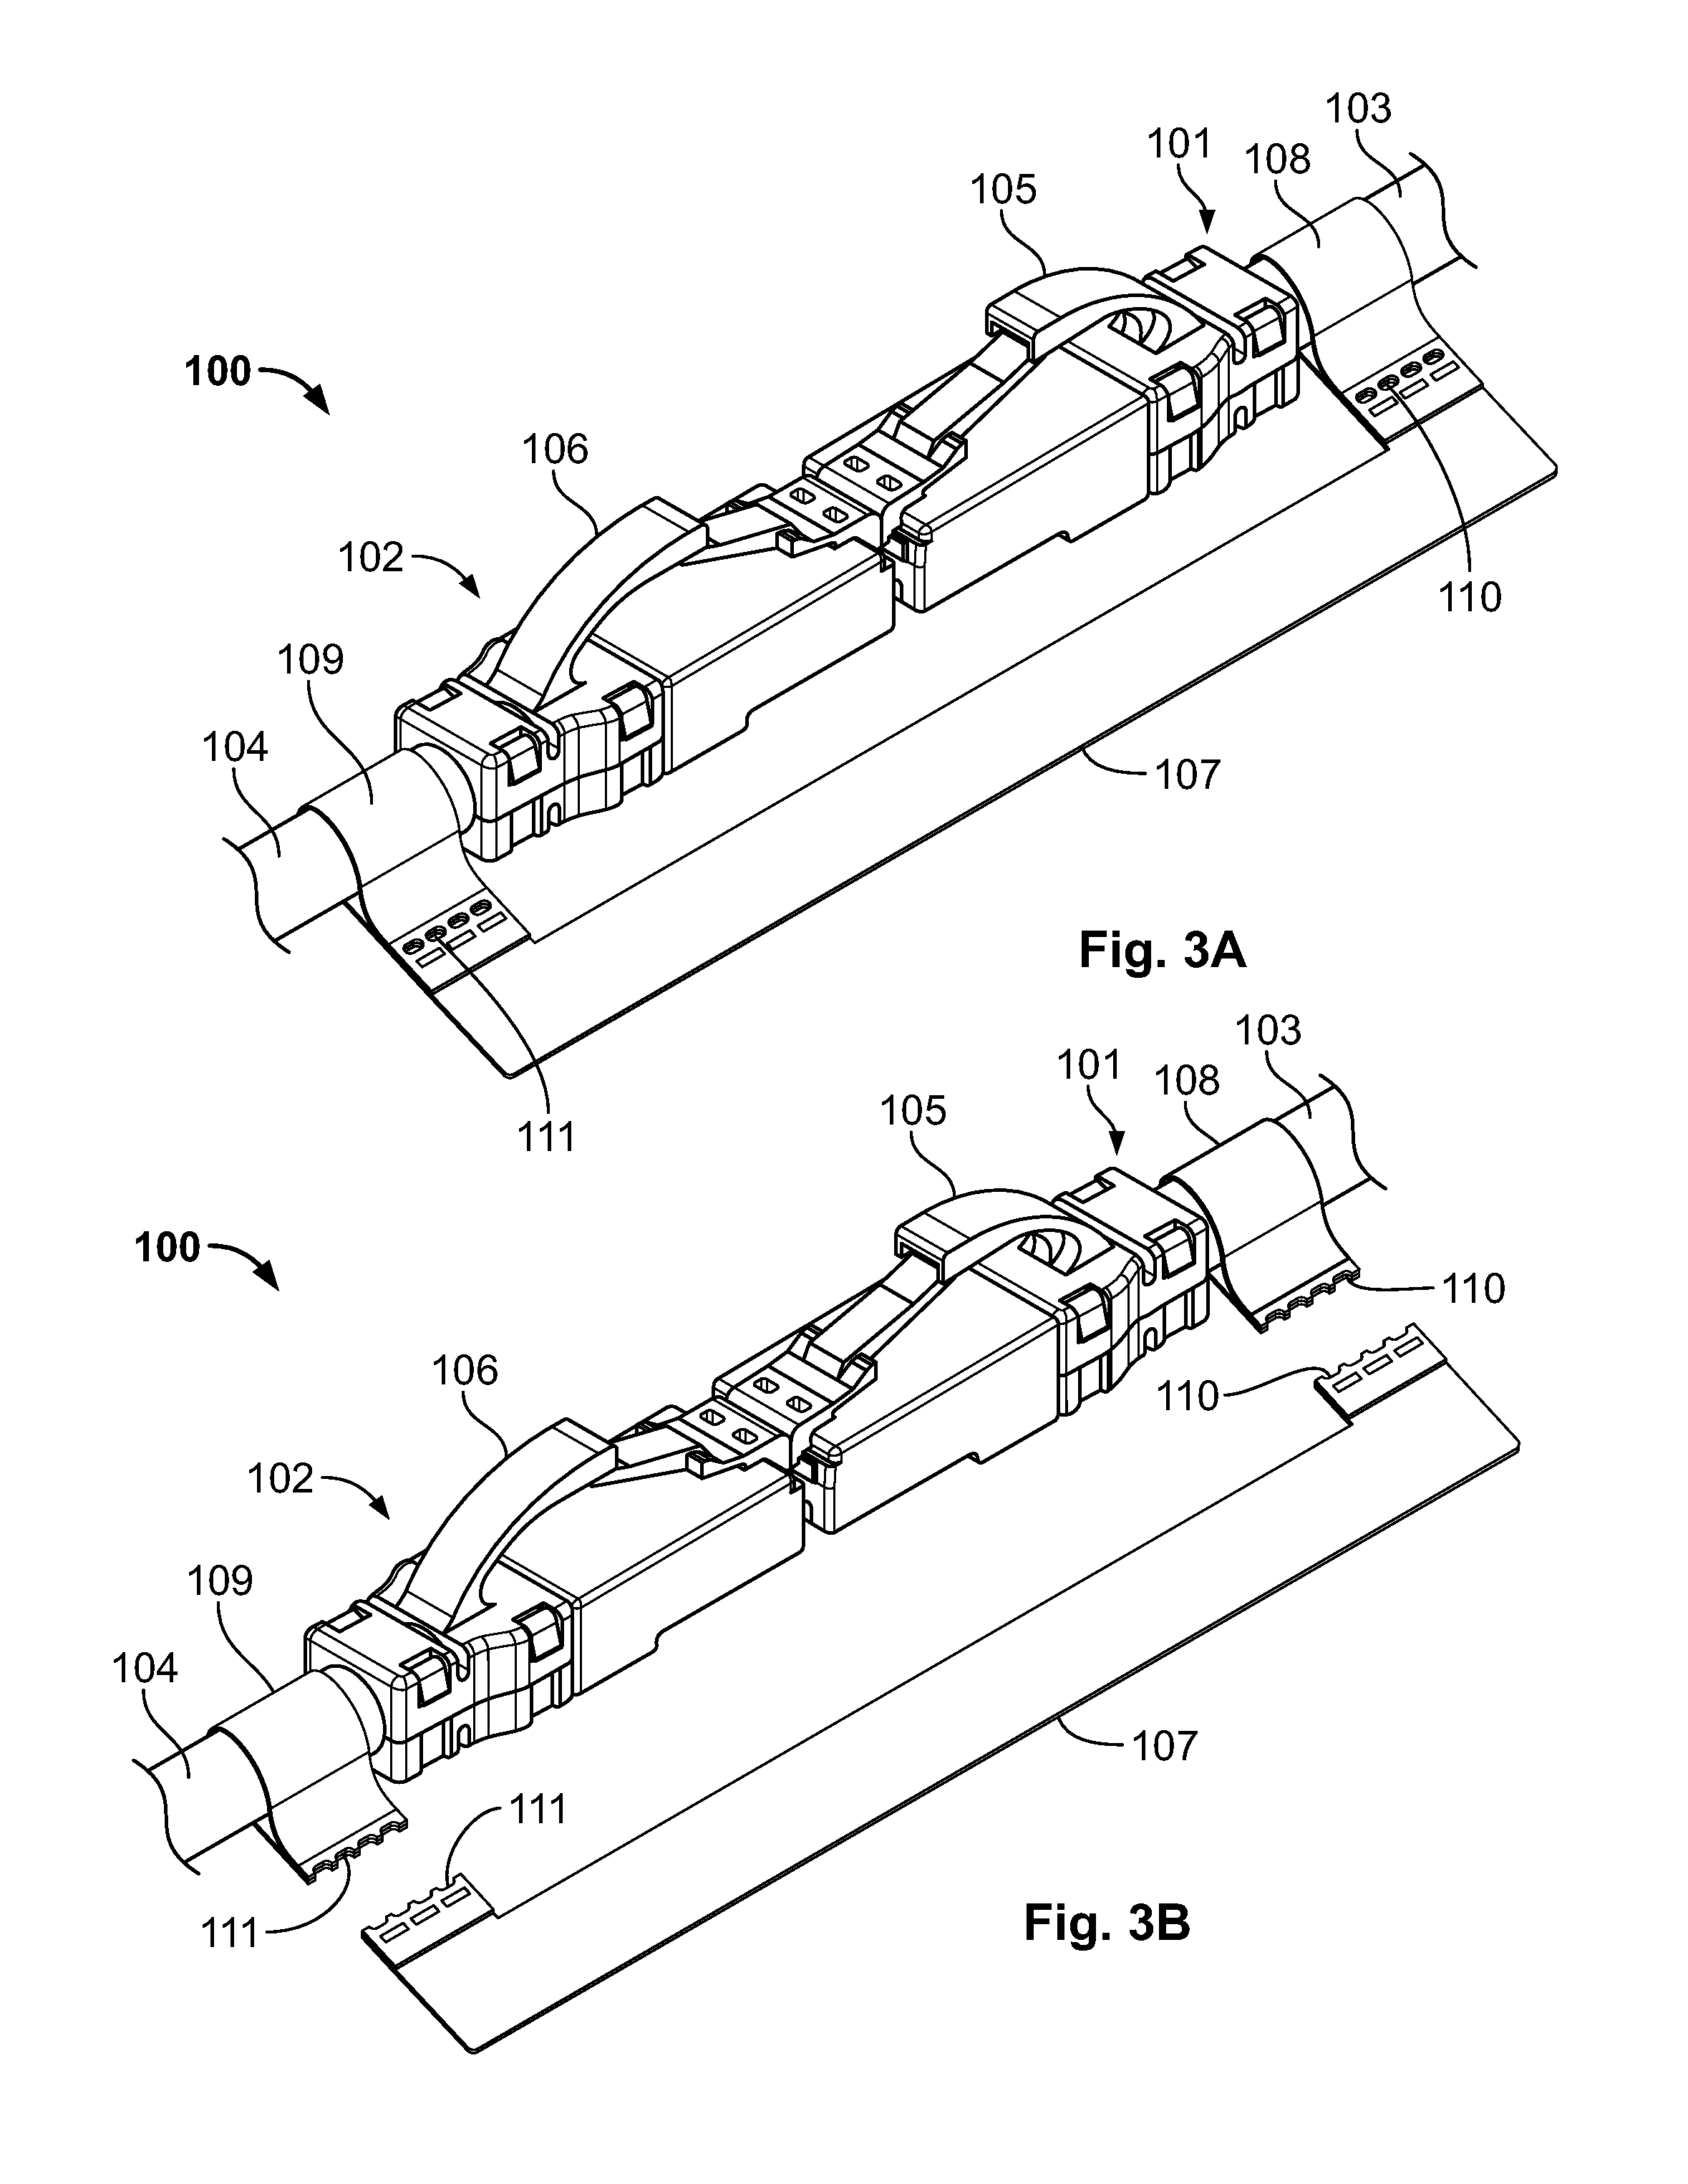 Patch cord assemblies, methods and systems